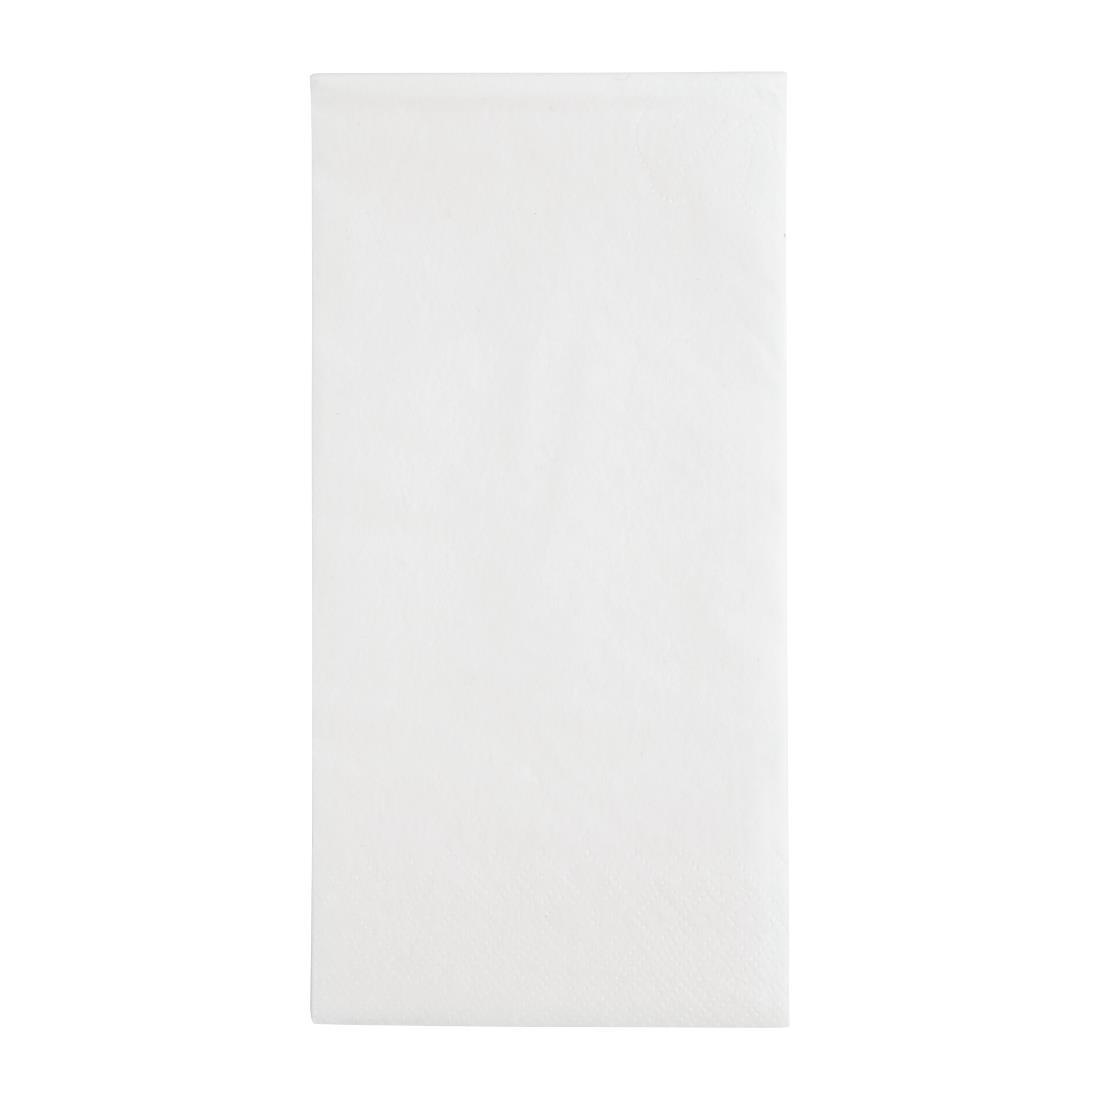 Fiesta Recyclable Dinner Napkin White 40x40cm 2ply 1/8 Fold (Pack of 2000) - FE243  - 2